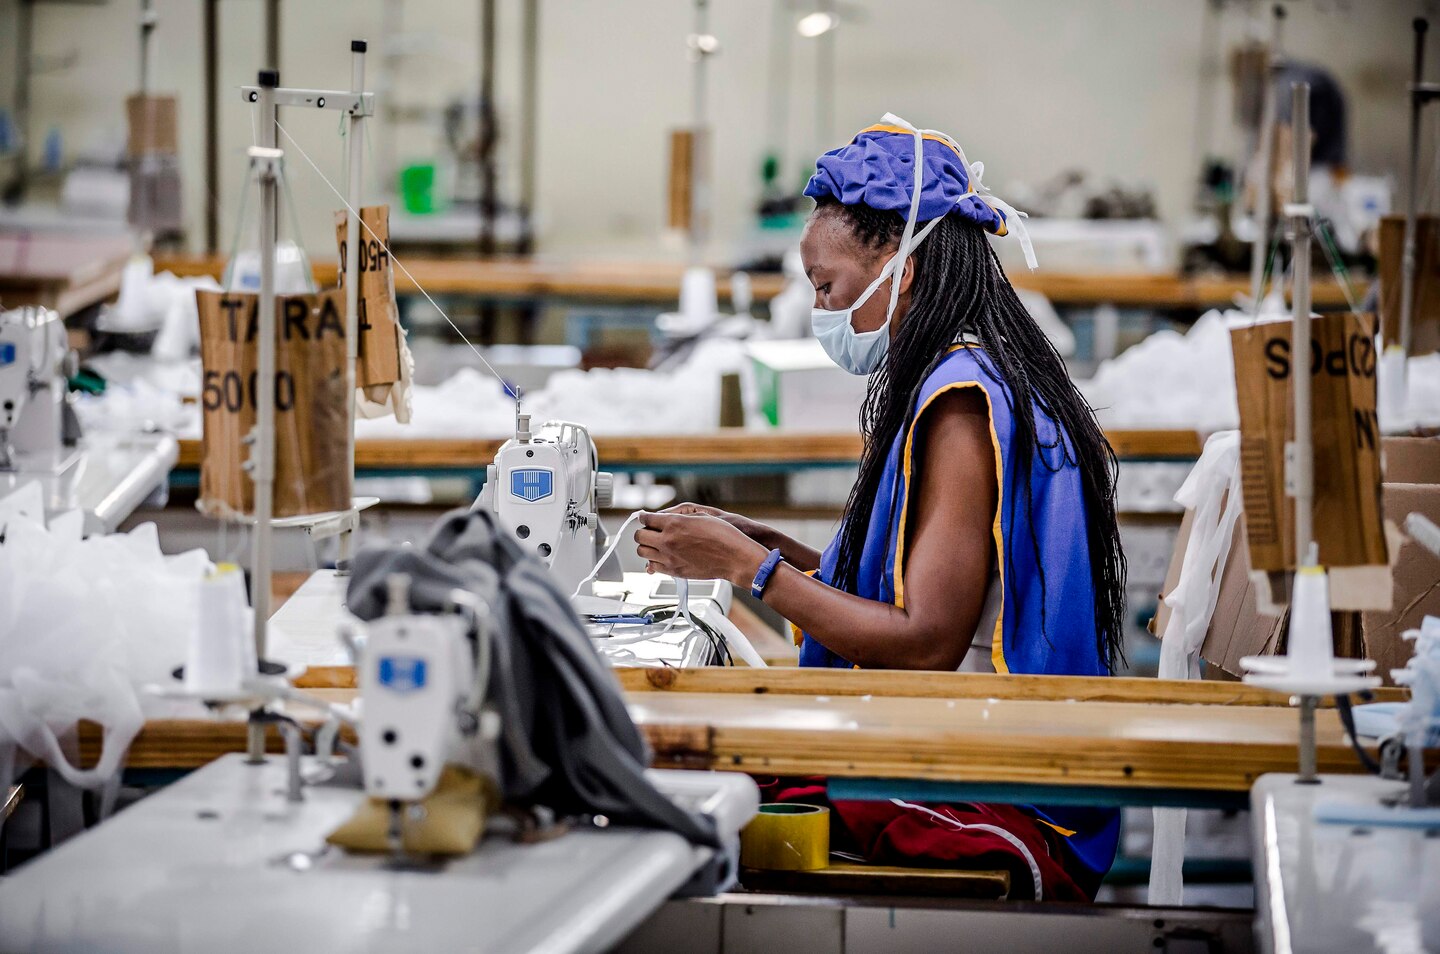 Kitui County Textile Centre ( KICOTEC ) Factory that Transformed into a Surgical Mask Assembly Line Overnight